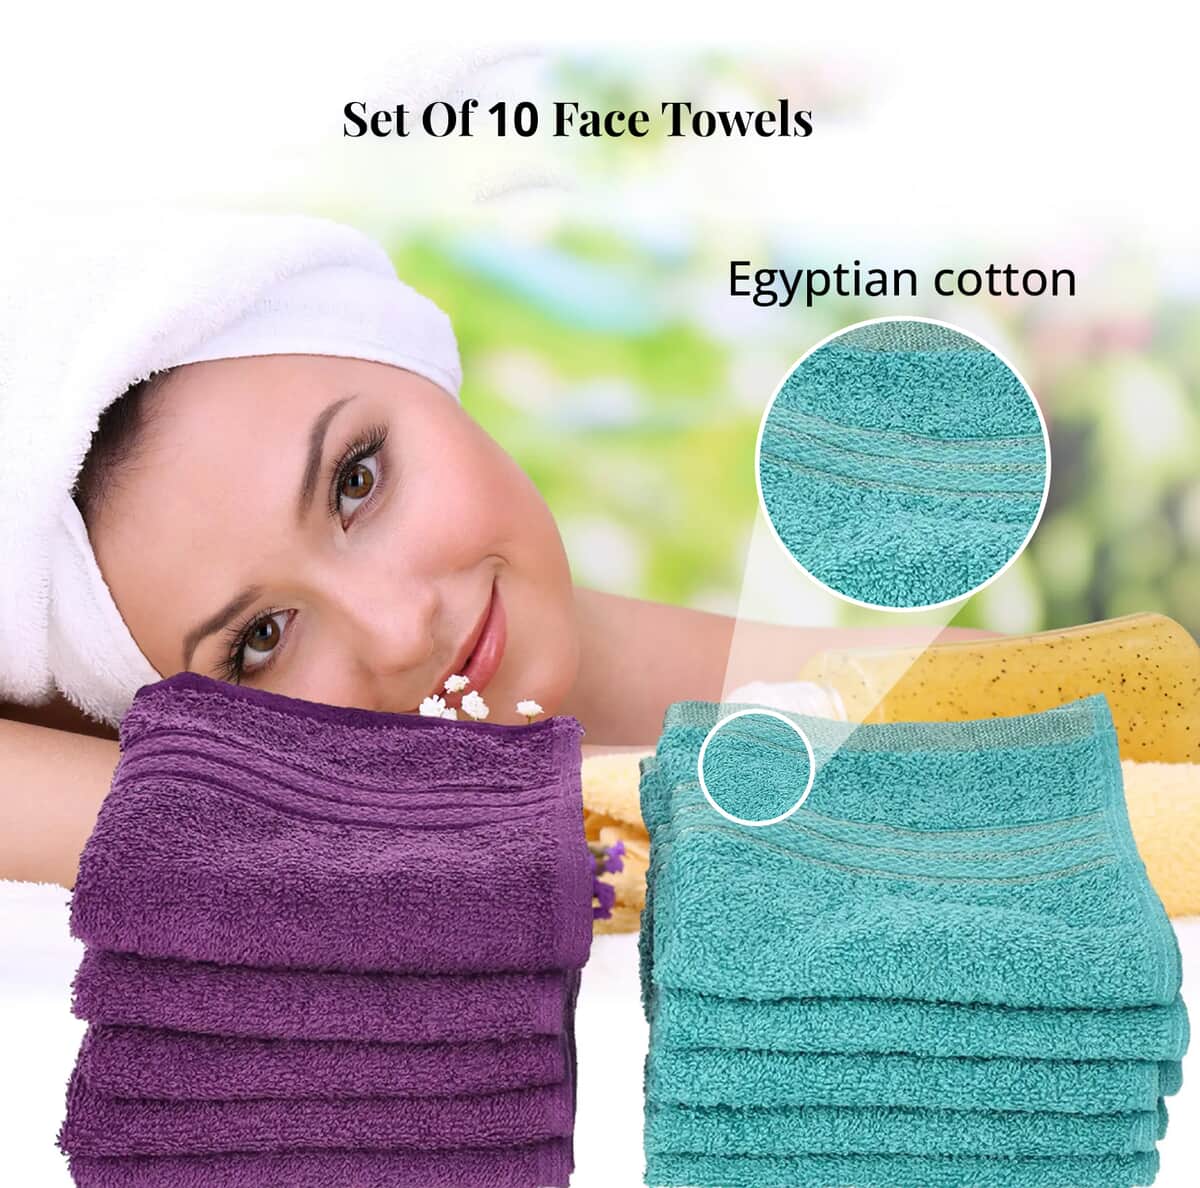 Set of 10 Turquoise and Purple 100% Egyptian Cotton Terry Face Towels image number 1